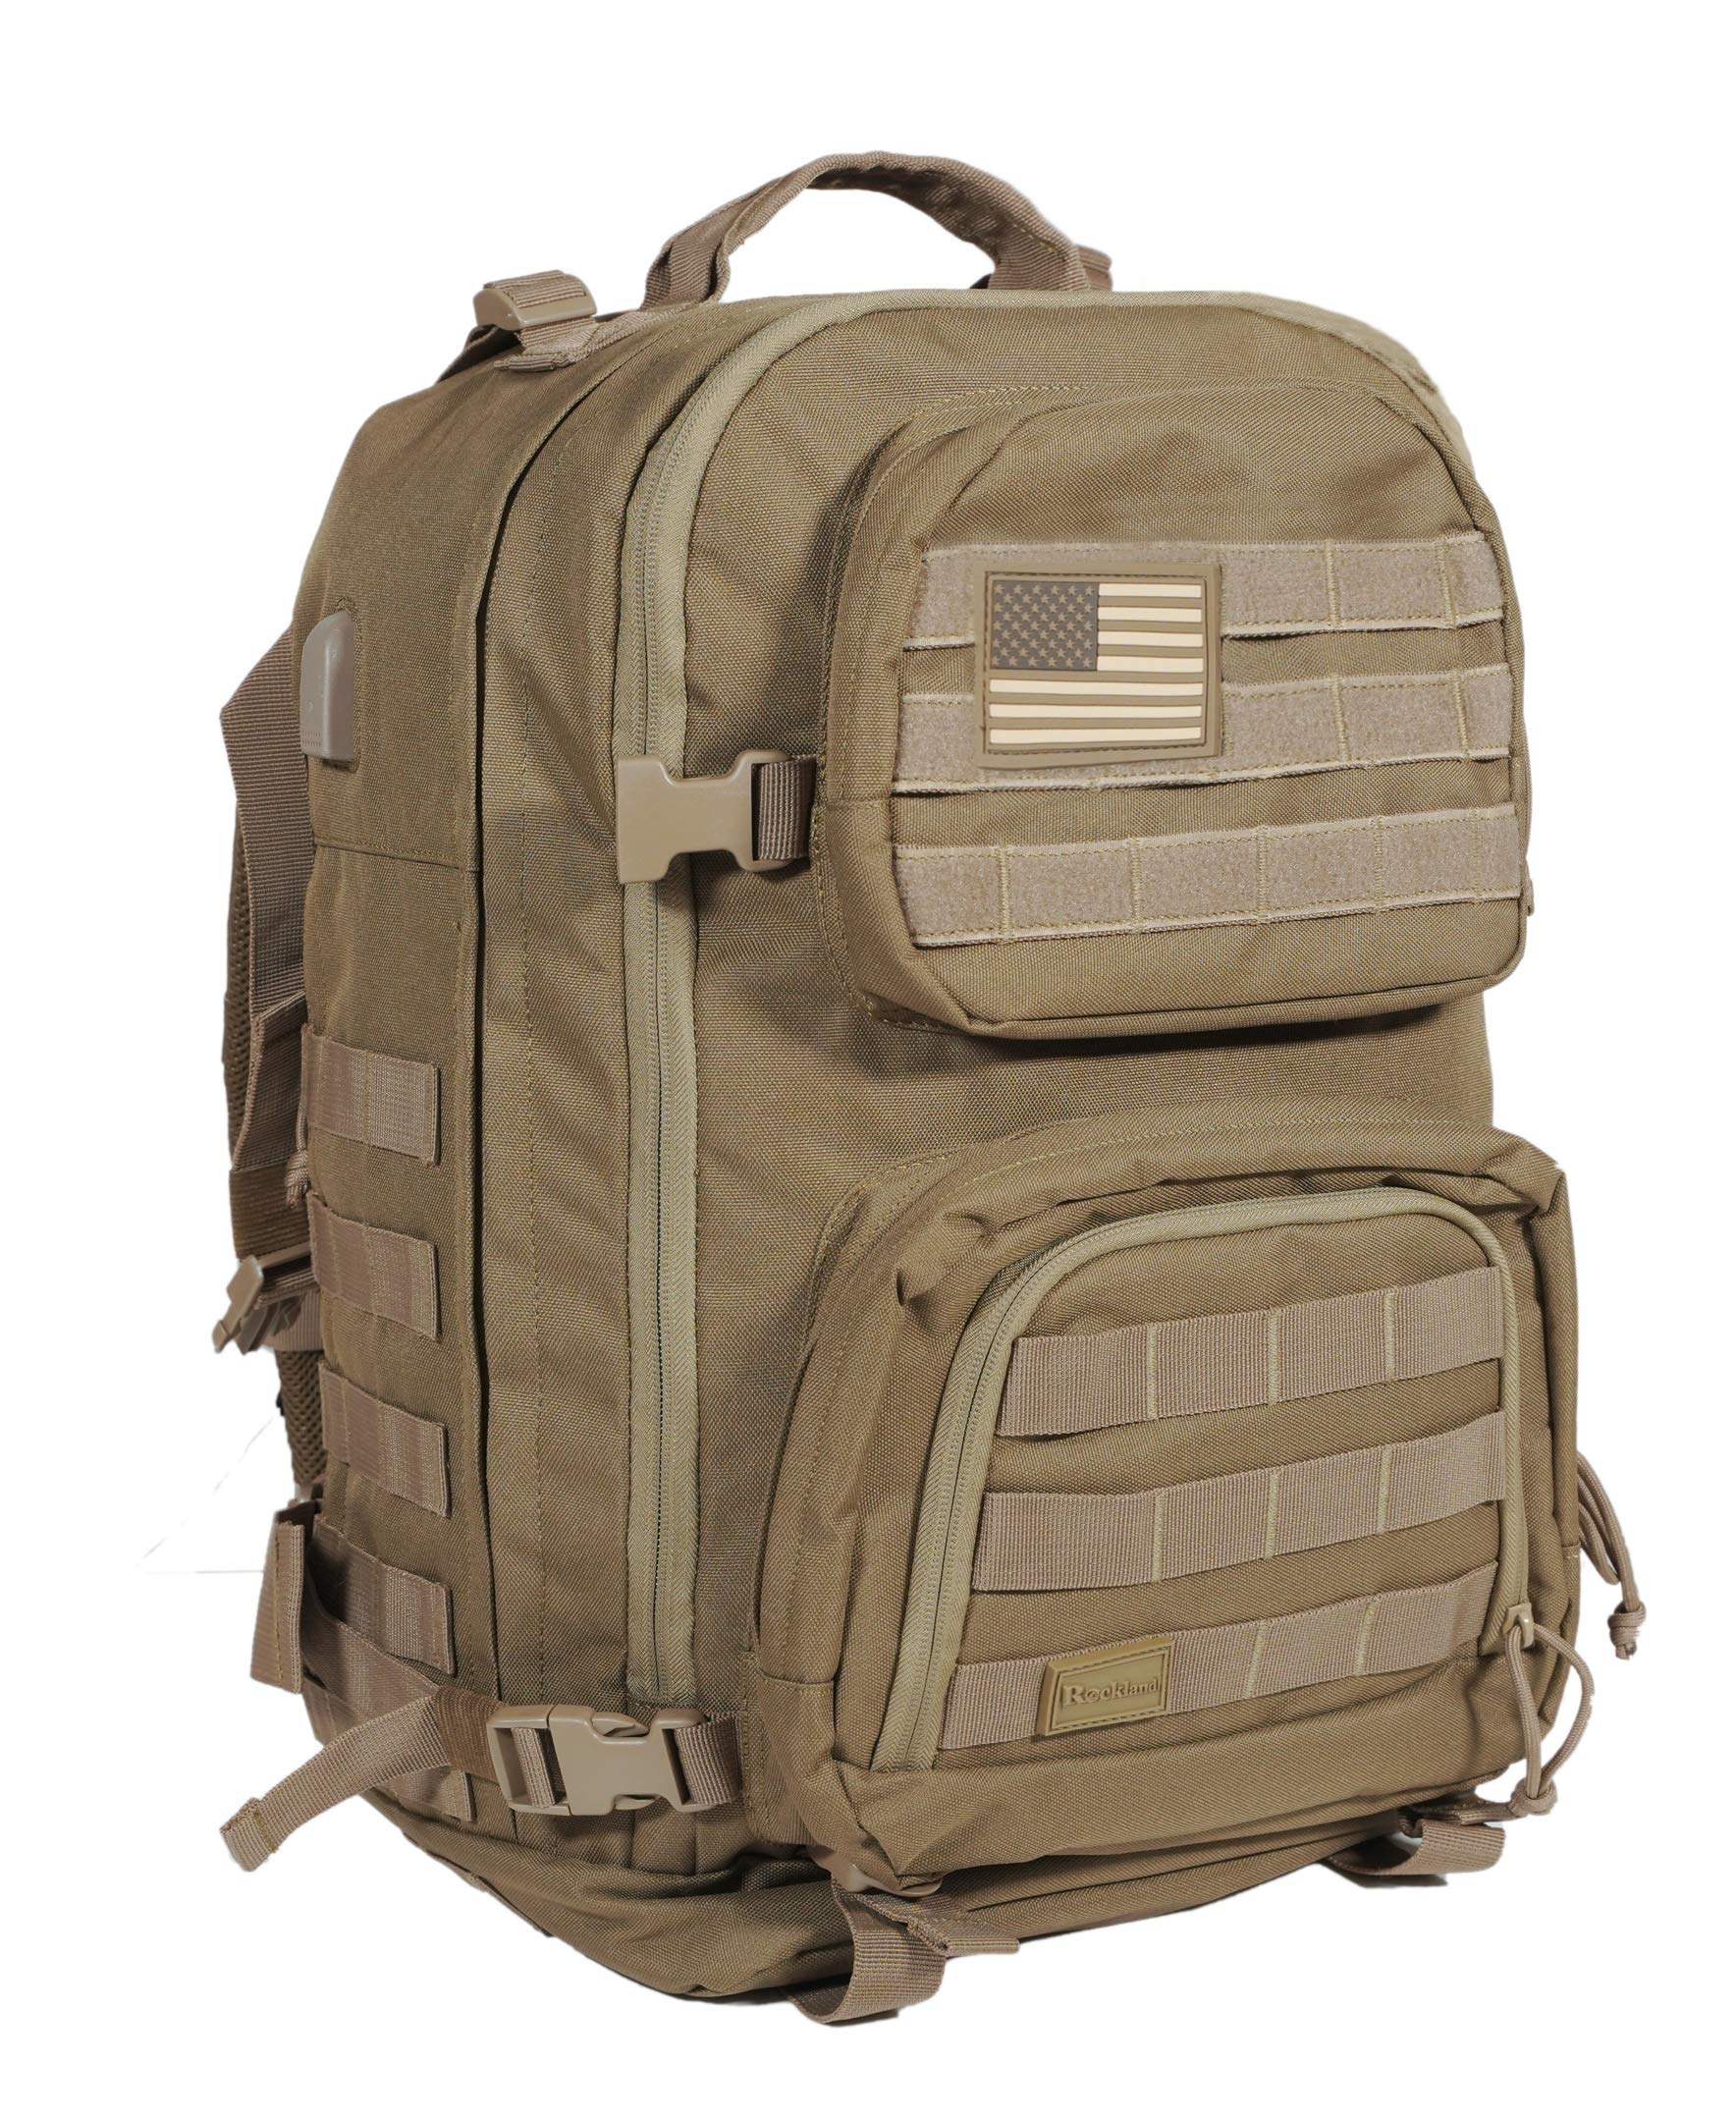 Rockland Military Tactical Laptop Backpack, Tan, Large